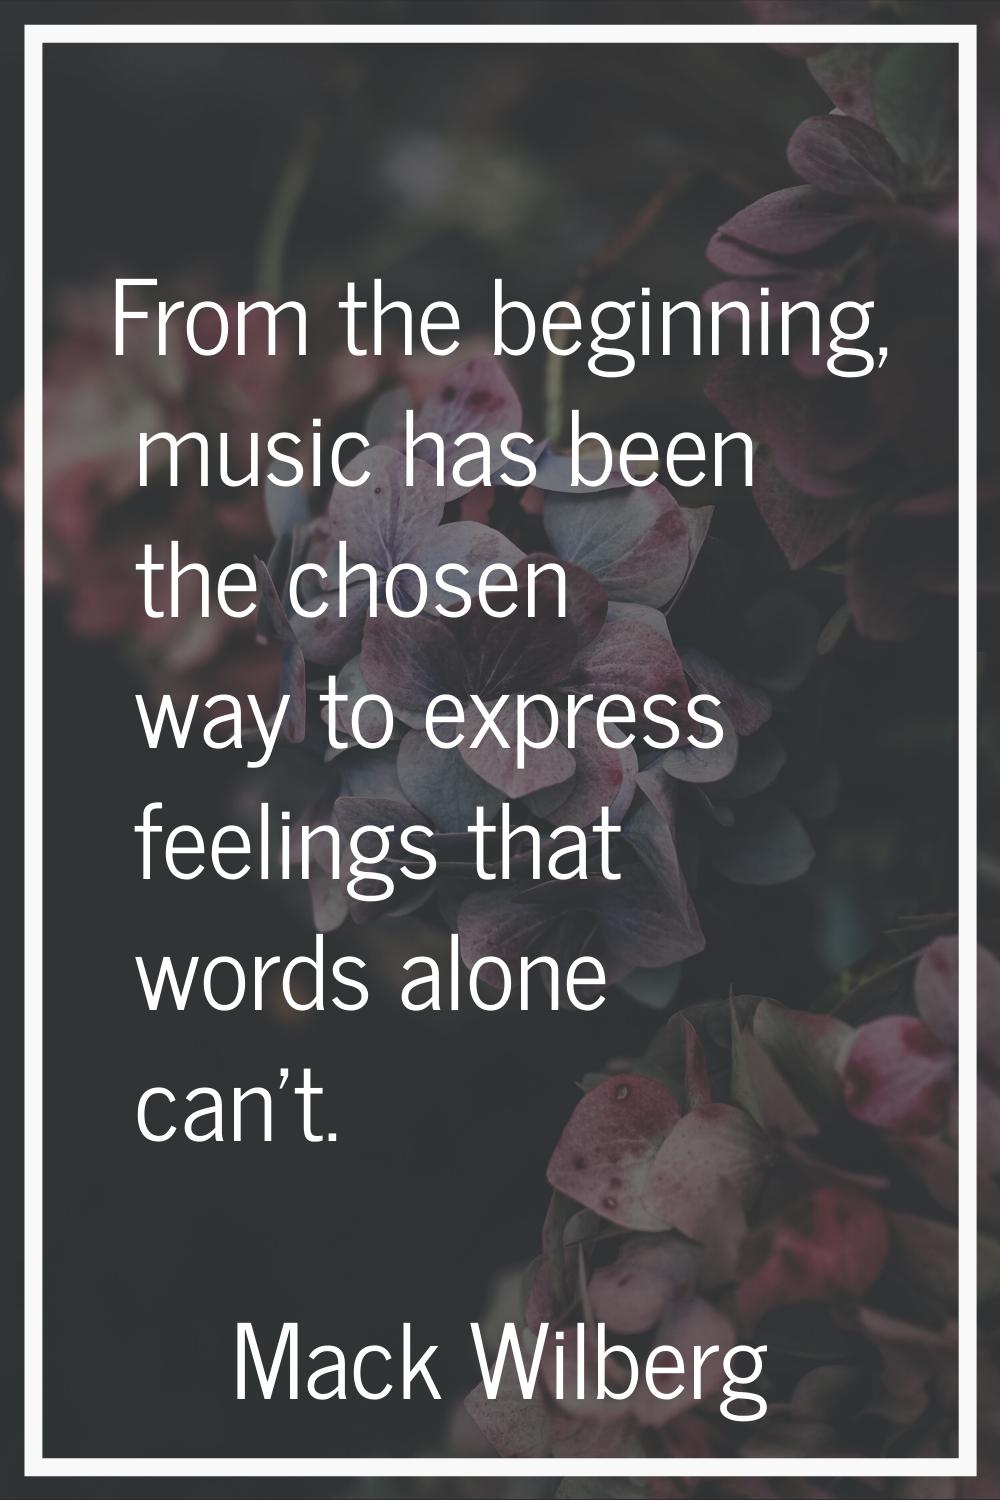 From the beginning, music has been the chosen way to express feelings that words alone can't.